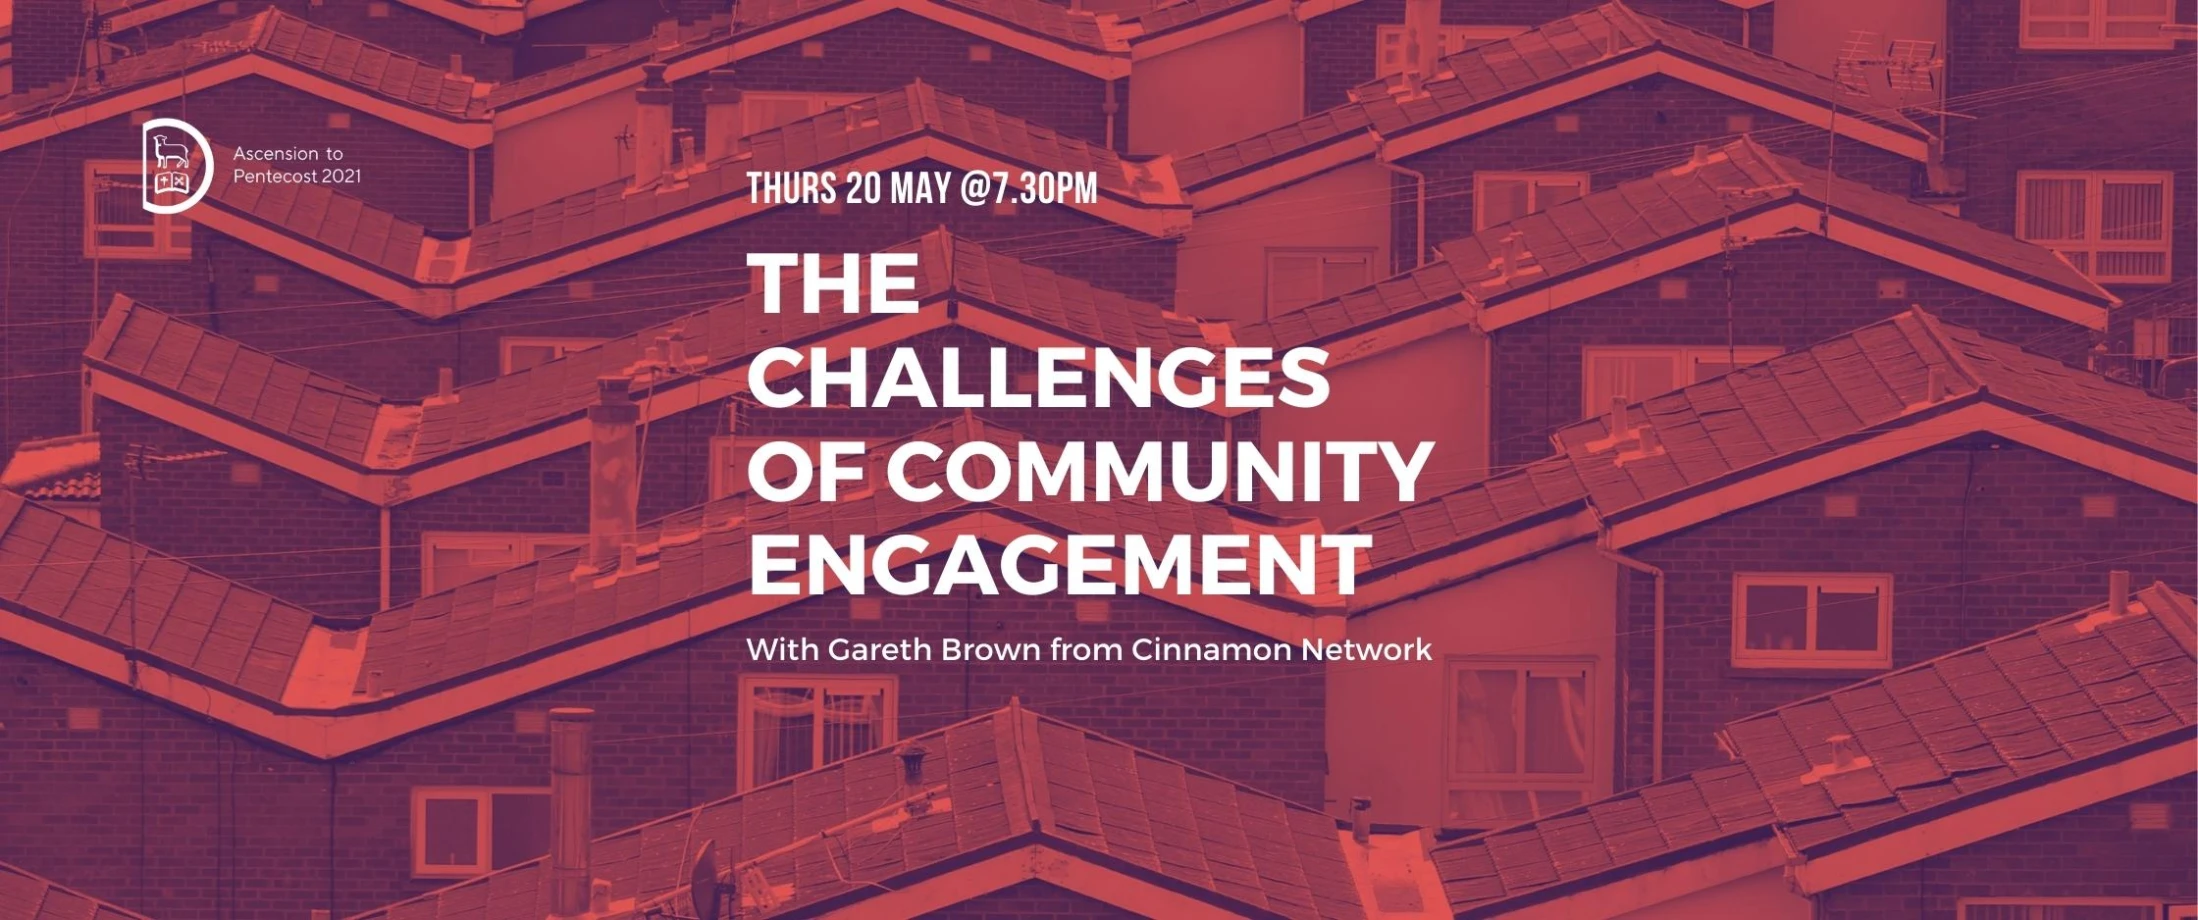 The Challenges of Community Engagement